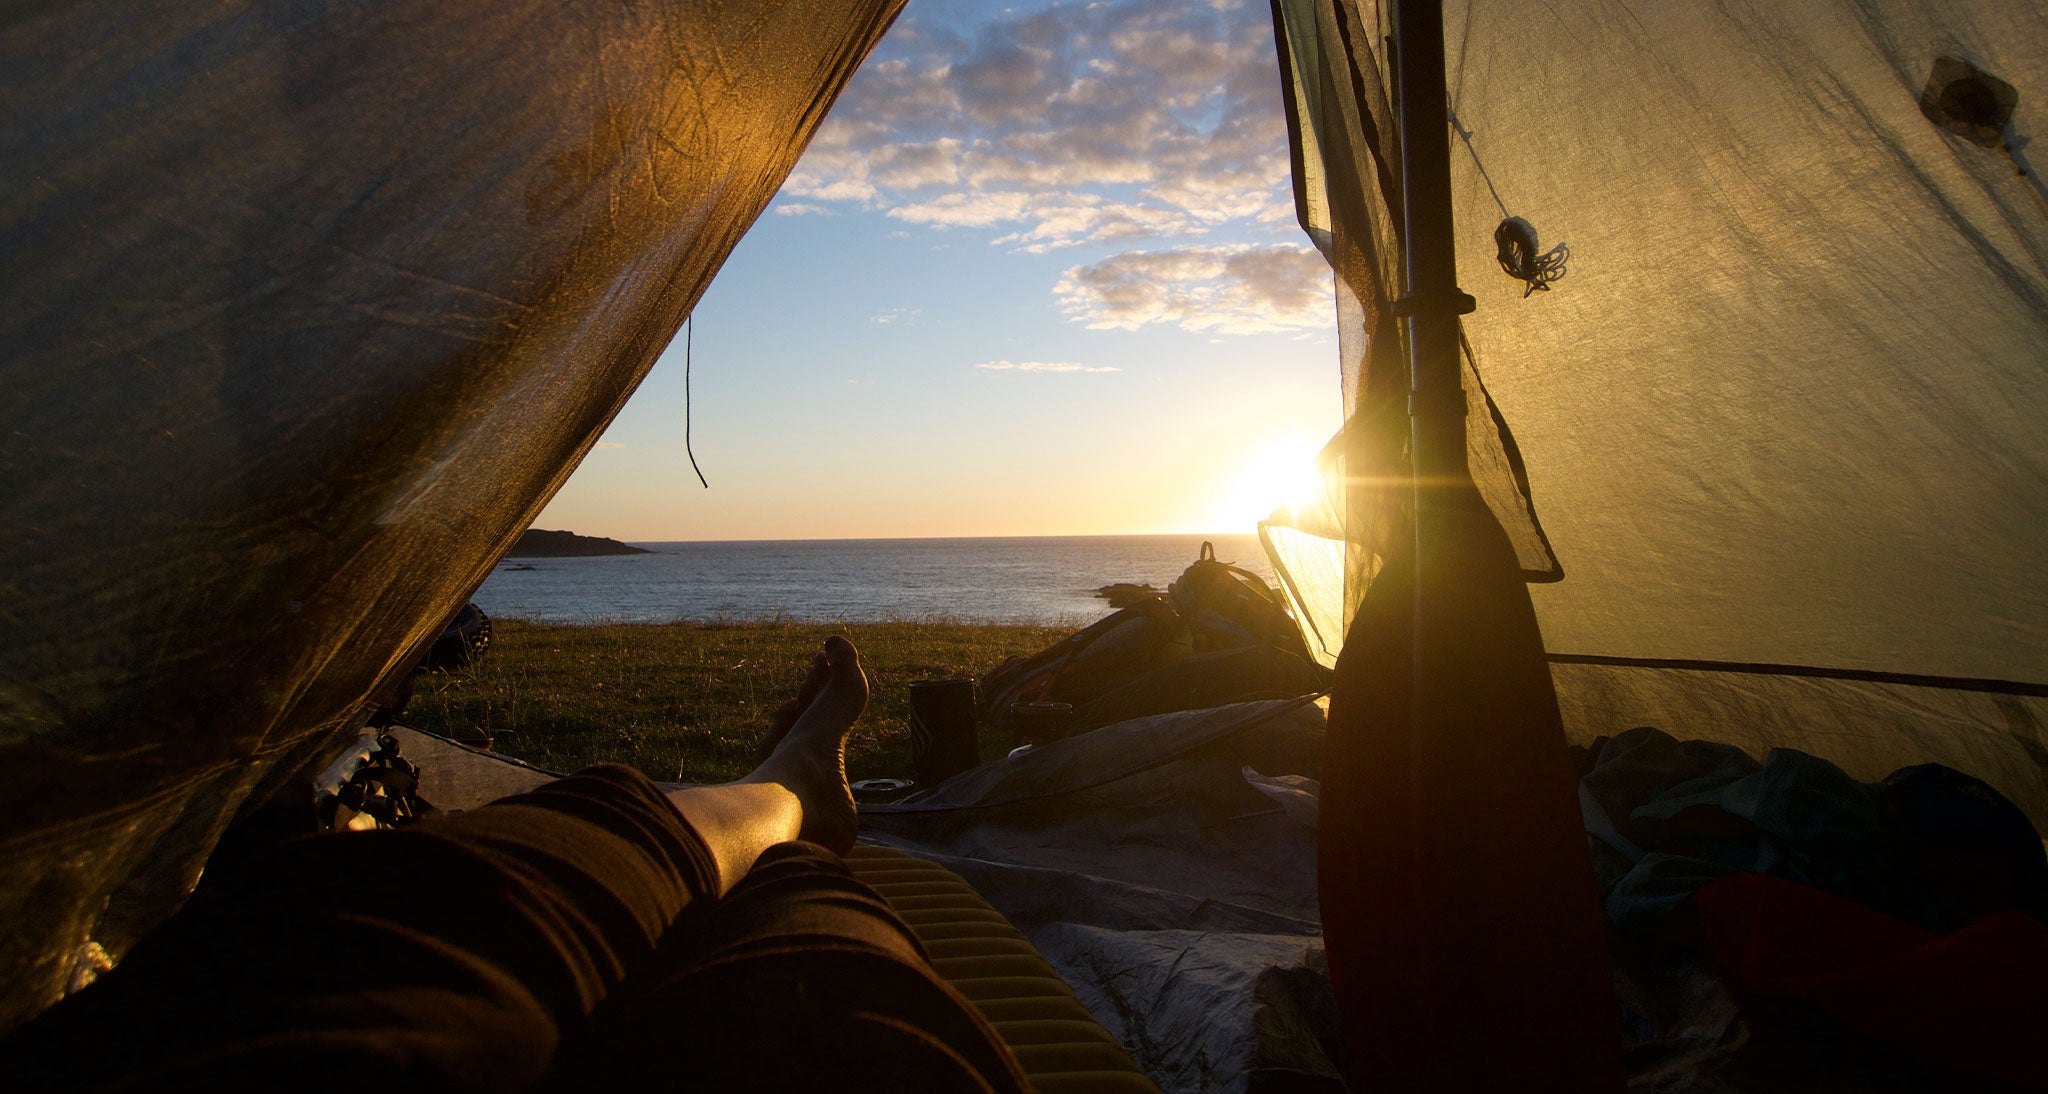 Laying in the tent, coastal sunset